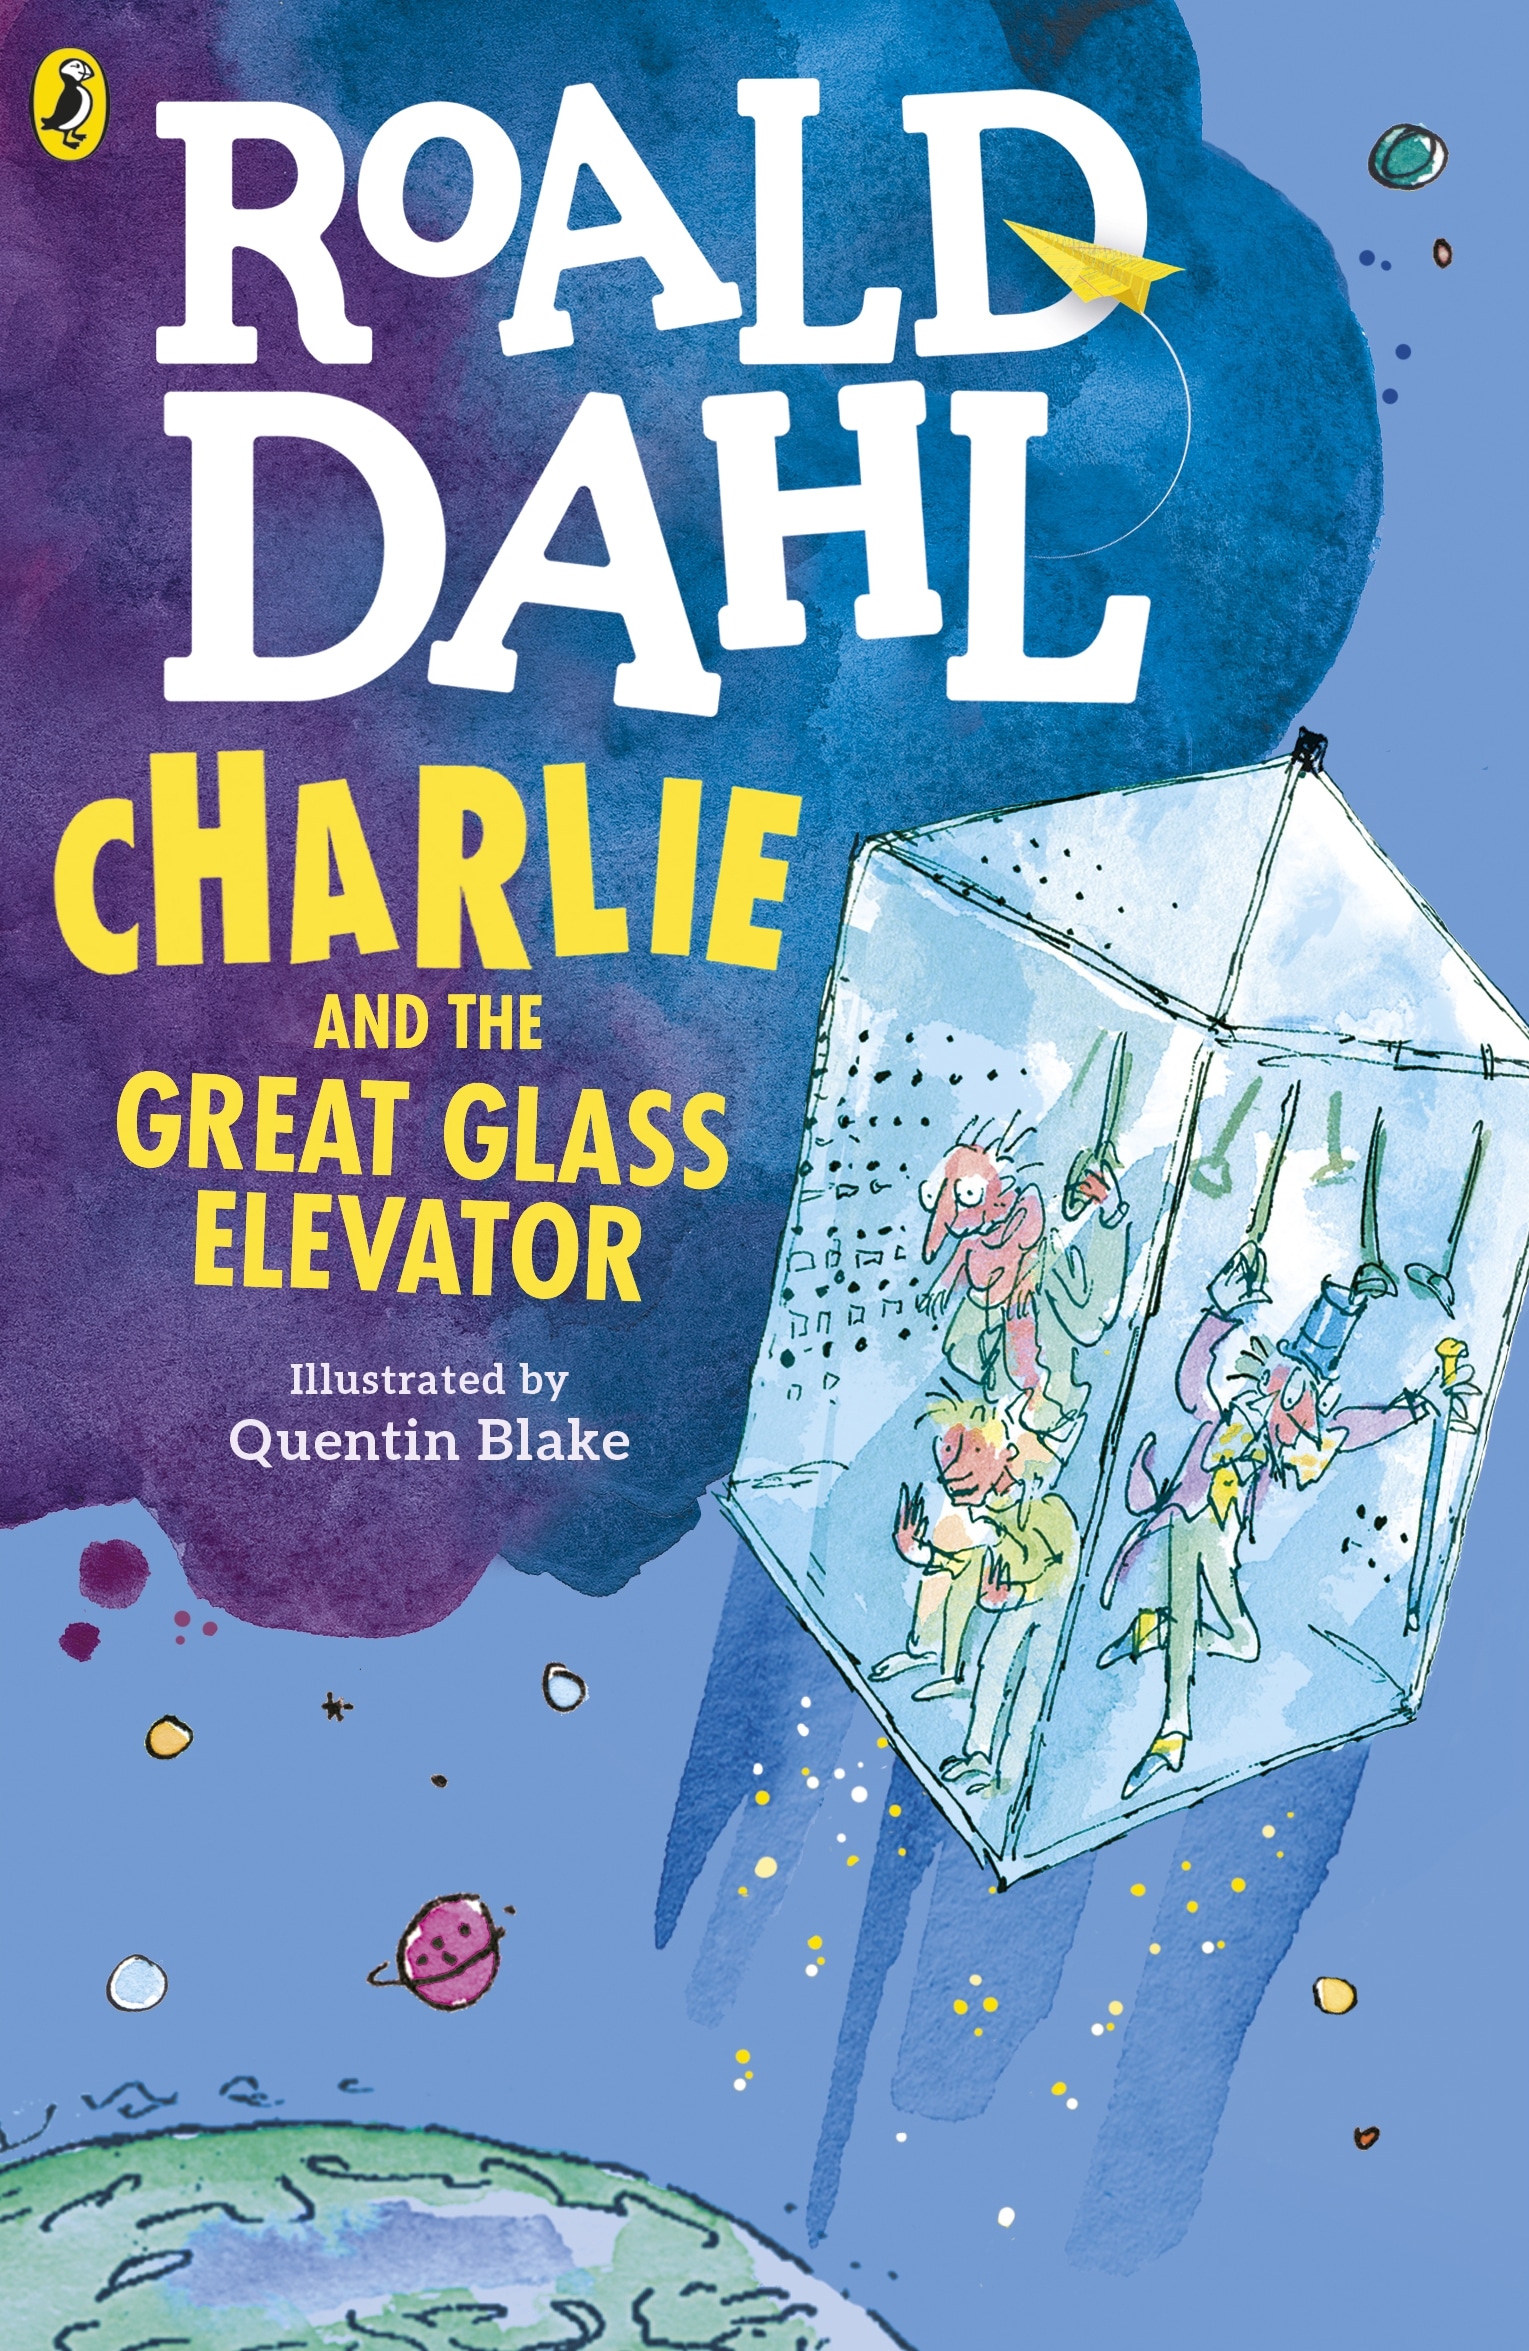 Book “Charlie and the Great Glass Elevator” by Roald Dahl — February 11, 2016